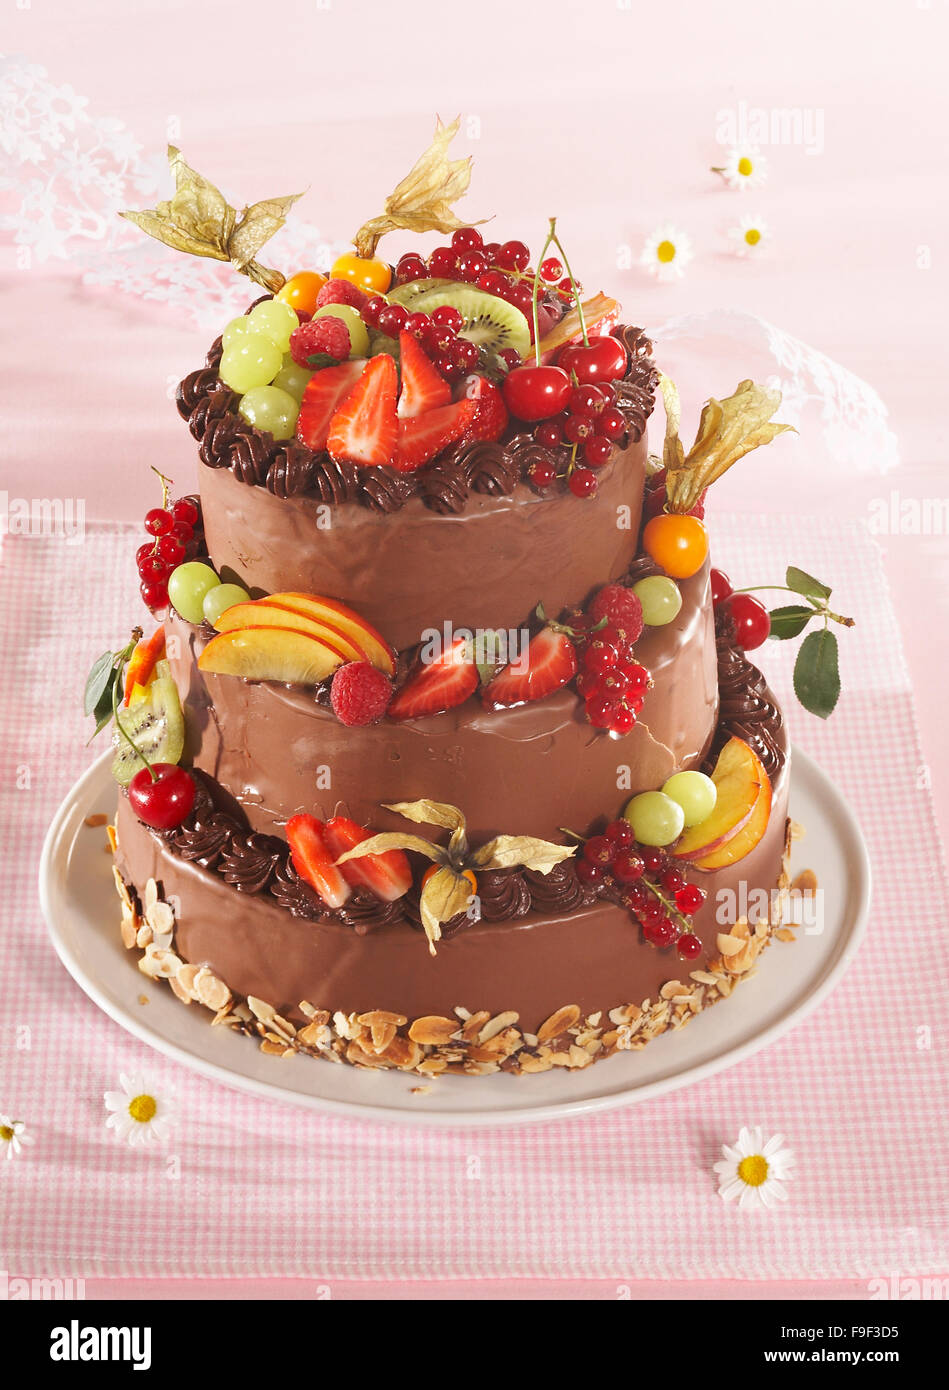 Cocoa Cake with Fruit (step by step Stock Photo - Alamy